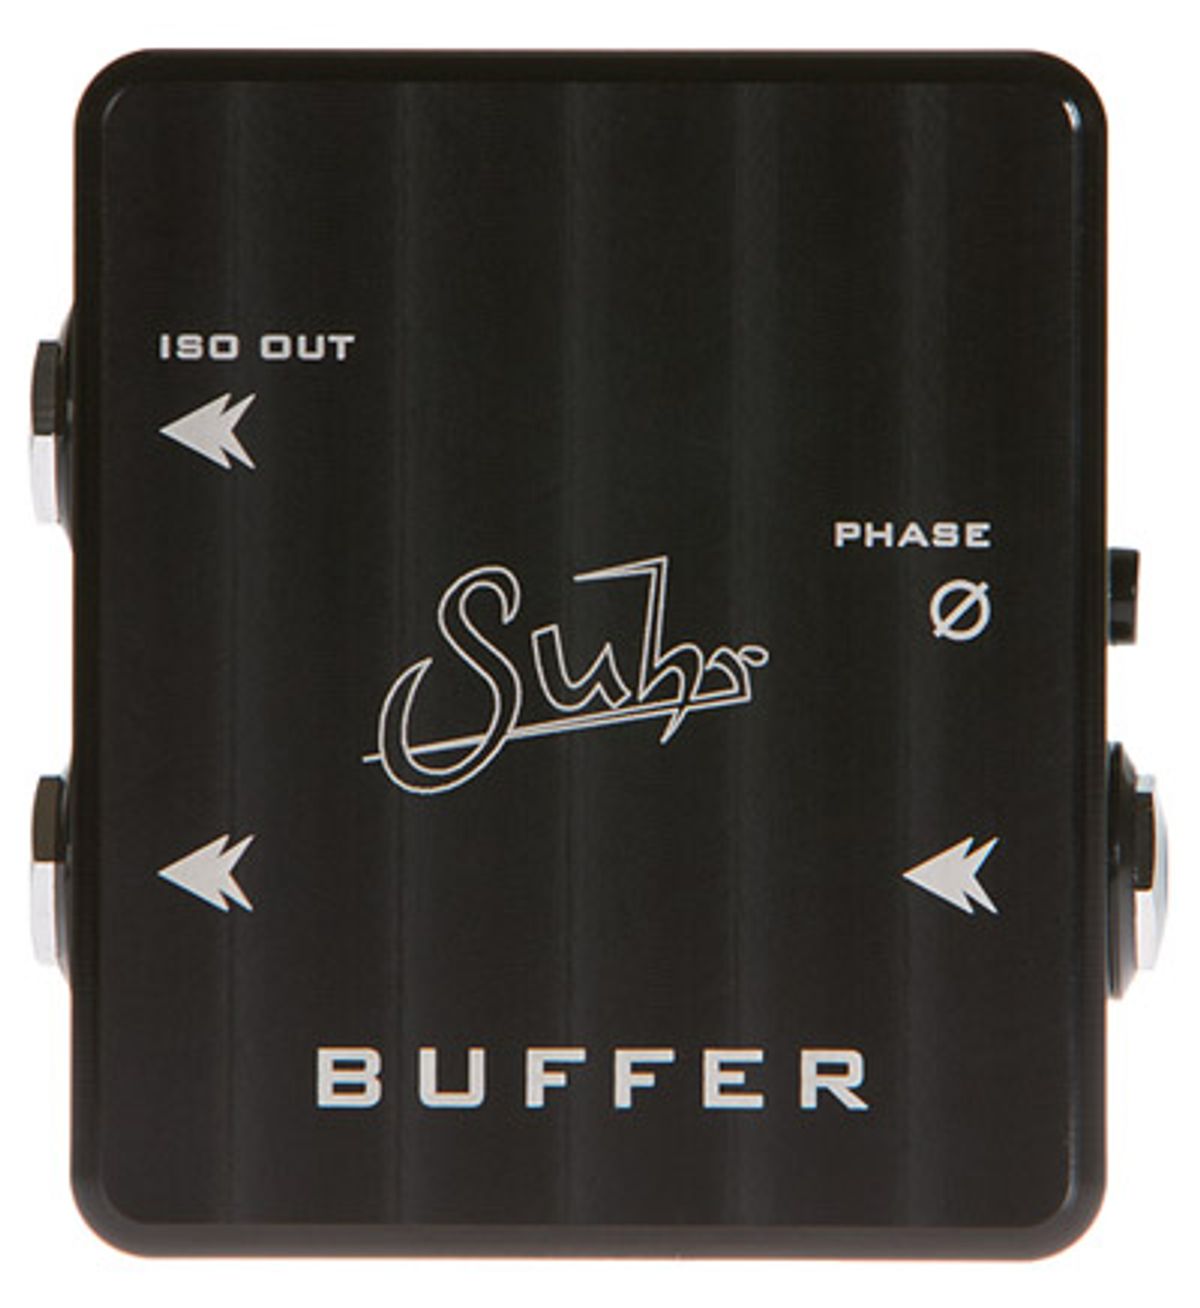 Suhr Introduces the Buffer Pedal